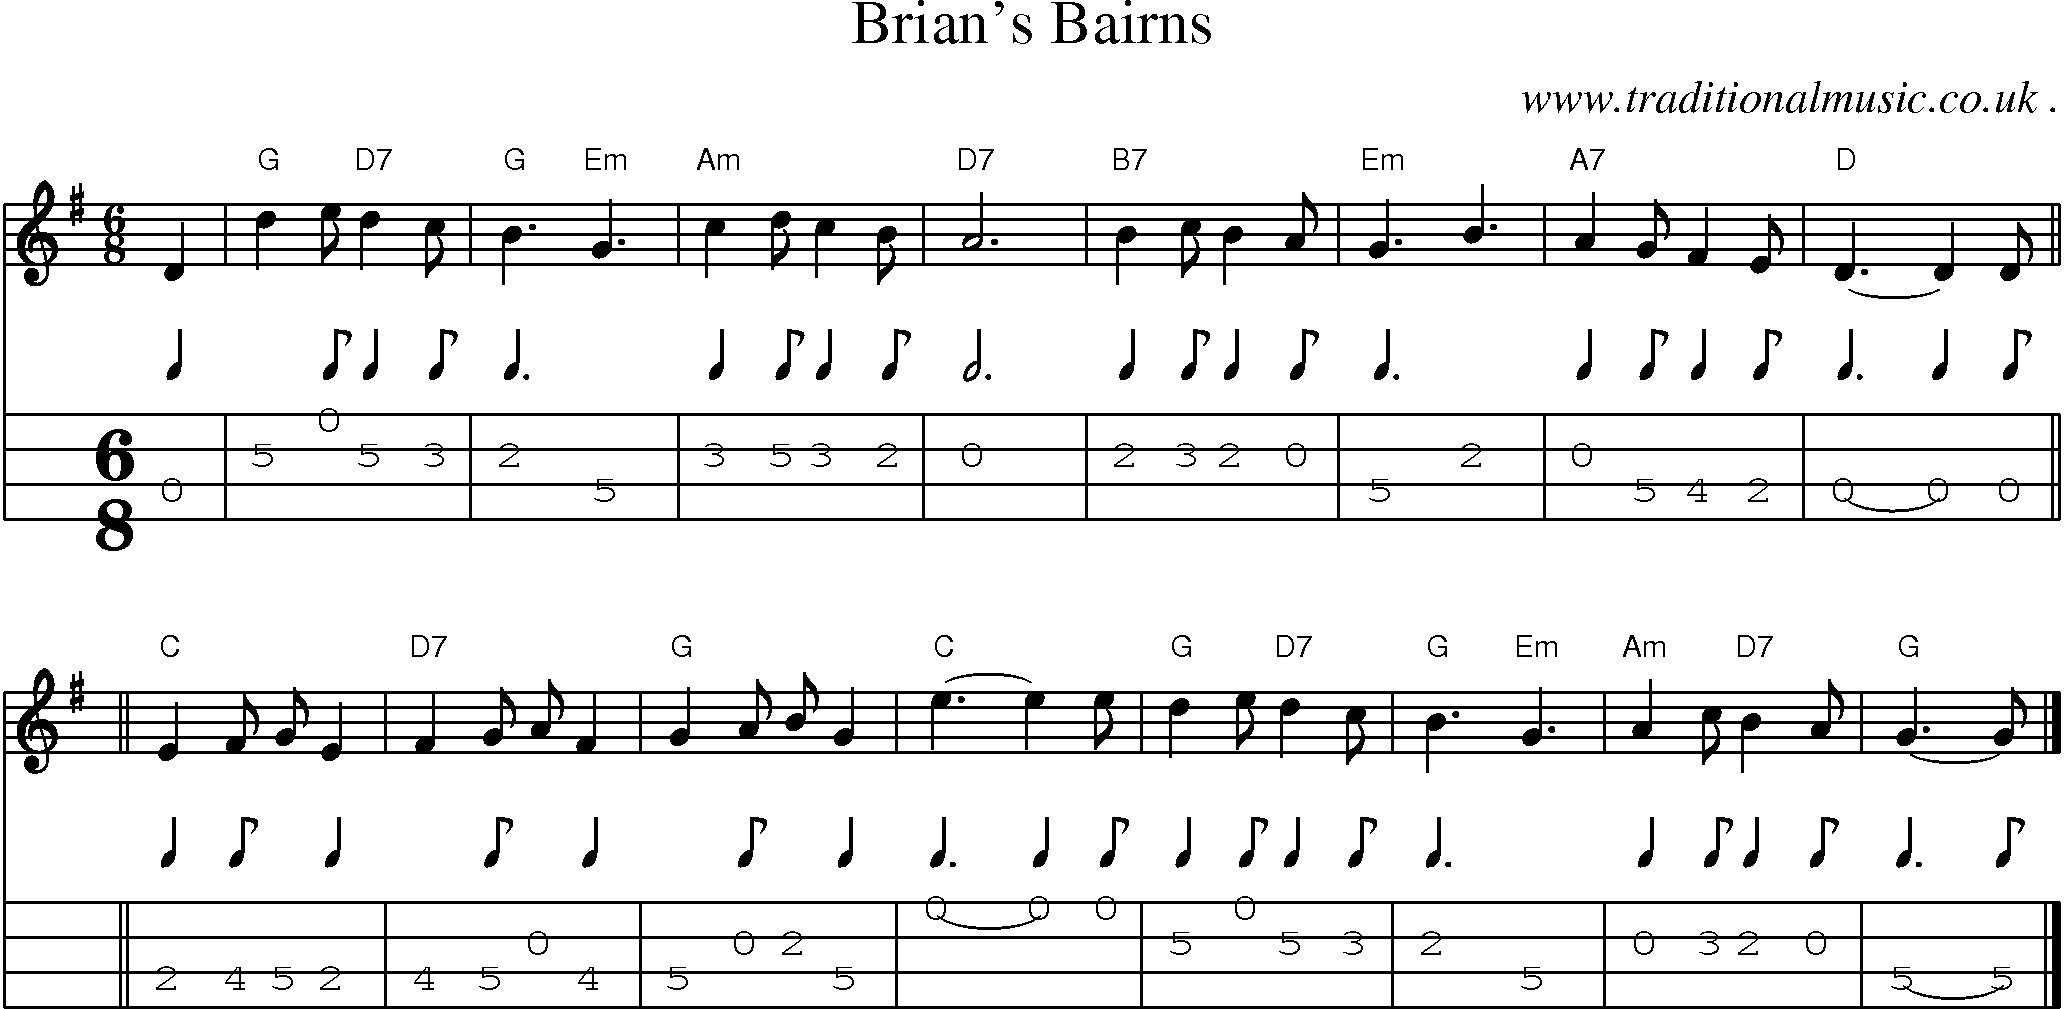 Sheet-music  score, Chords and Mandolin Tabs for Brians Bairns